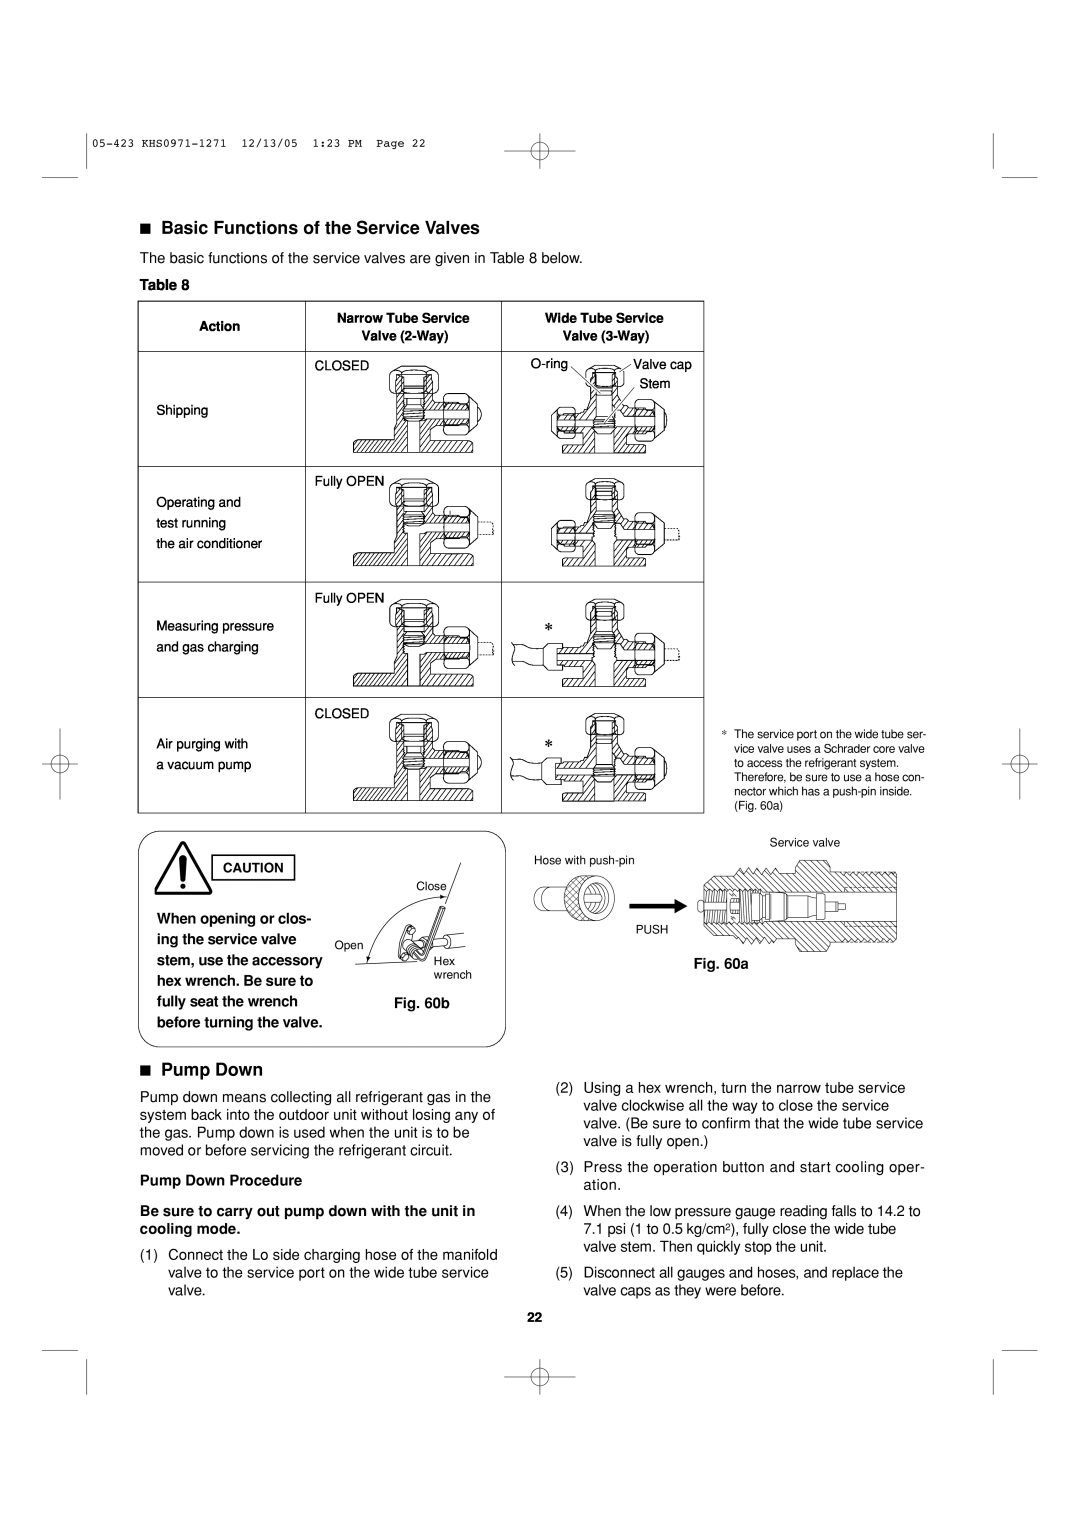 Sanyo 8.53E+13 installation instructions Basic Functions of the Service Valves, Pump Down 